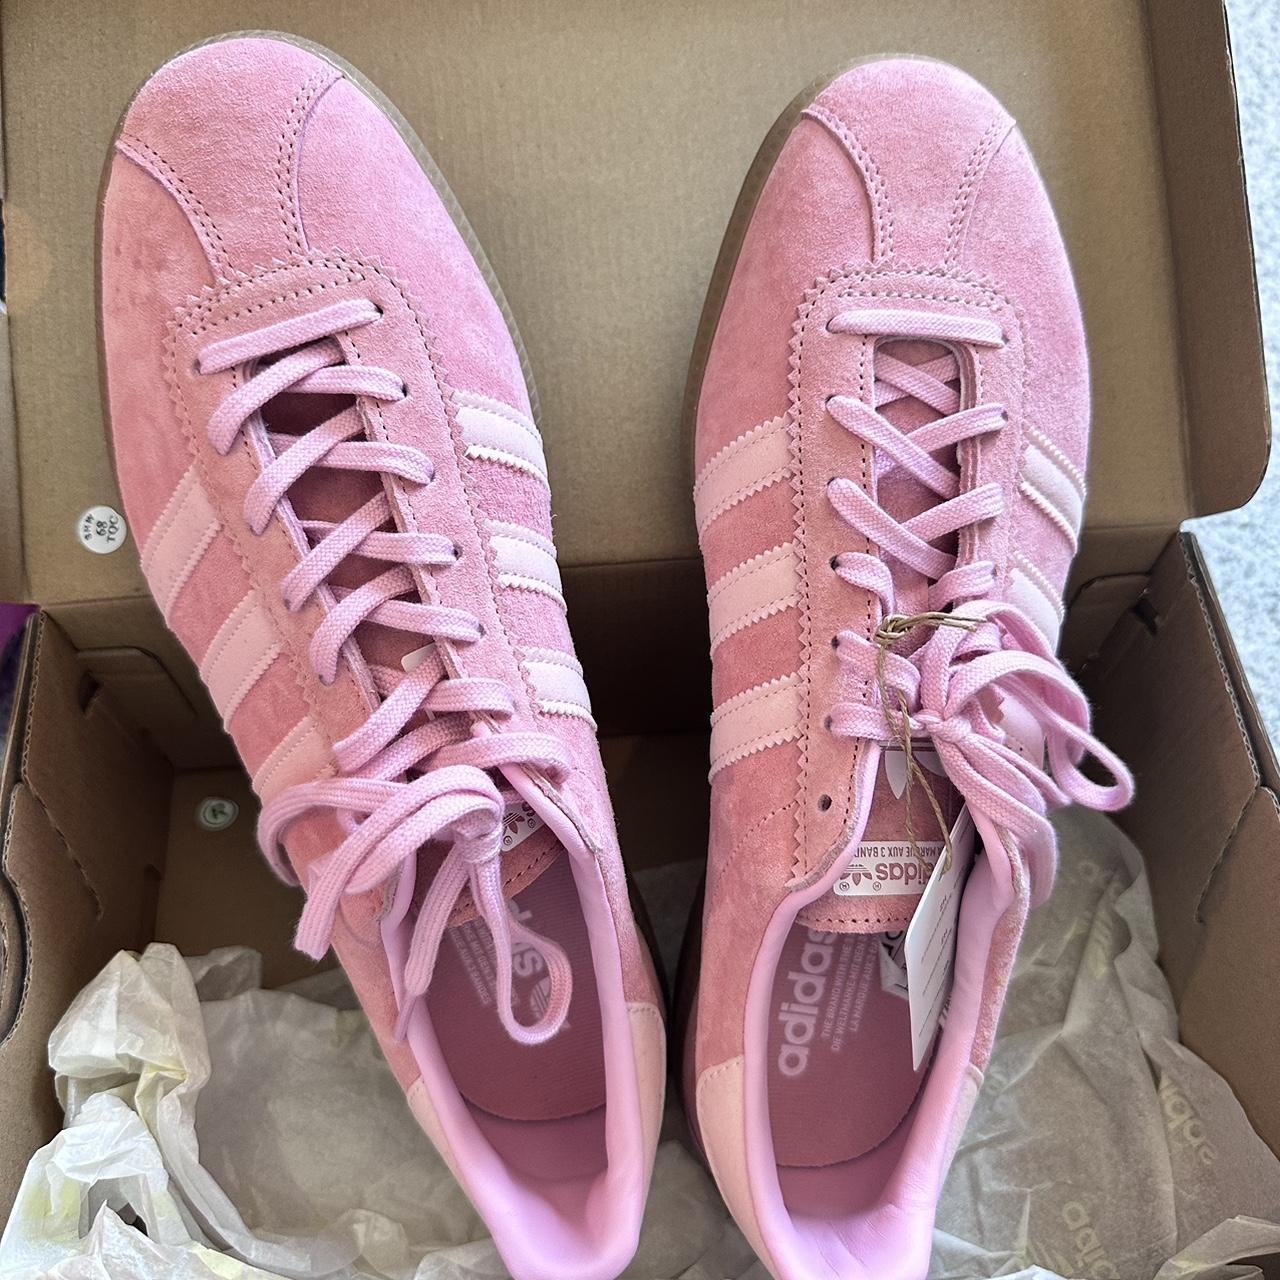 Will these CLASSICS release in AMERICA? ADIDAS BERMUDA Glow Pink